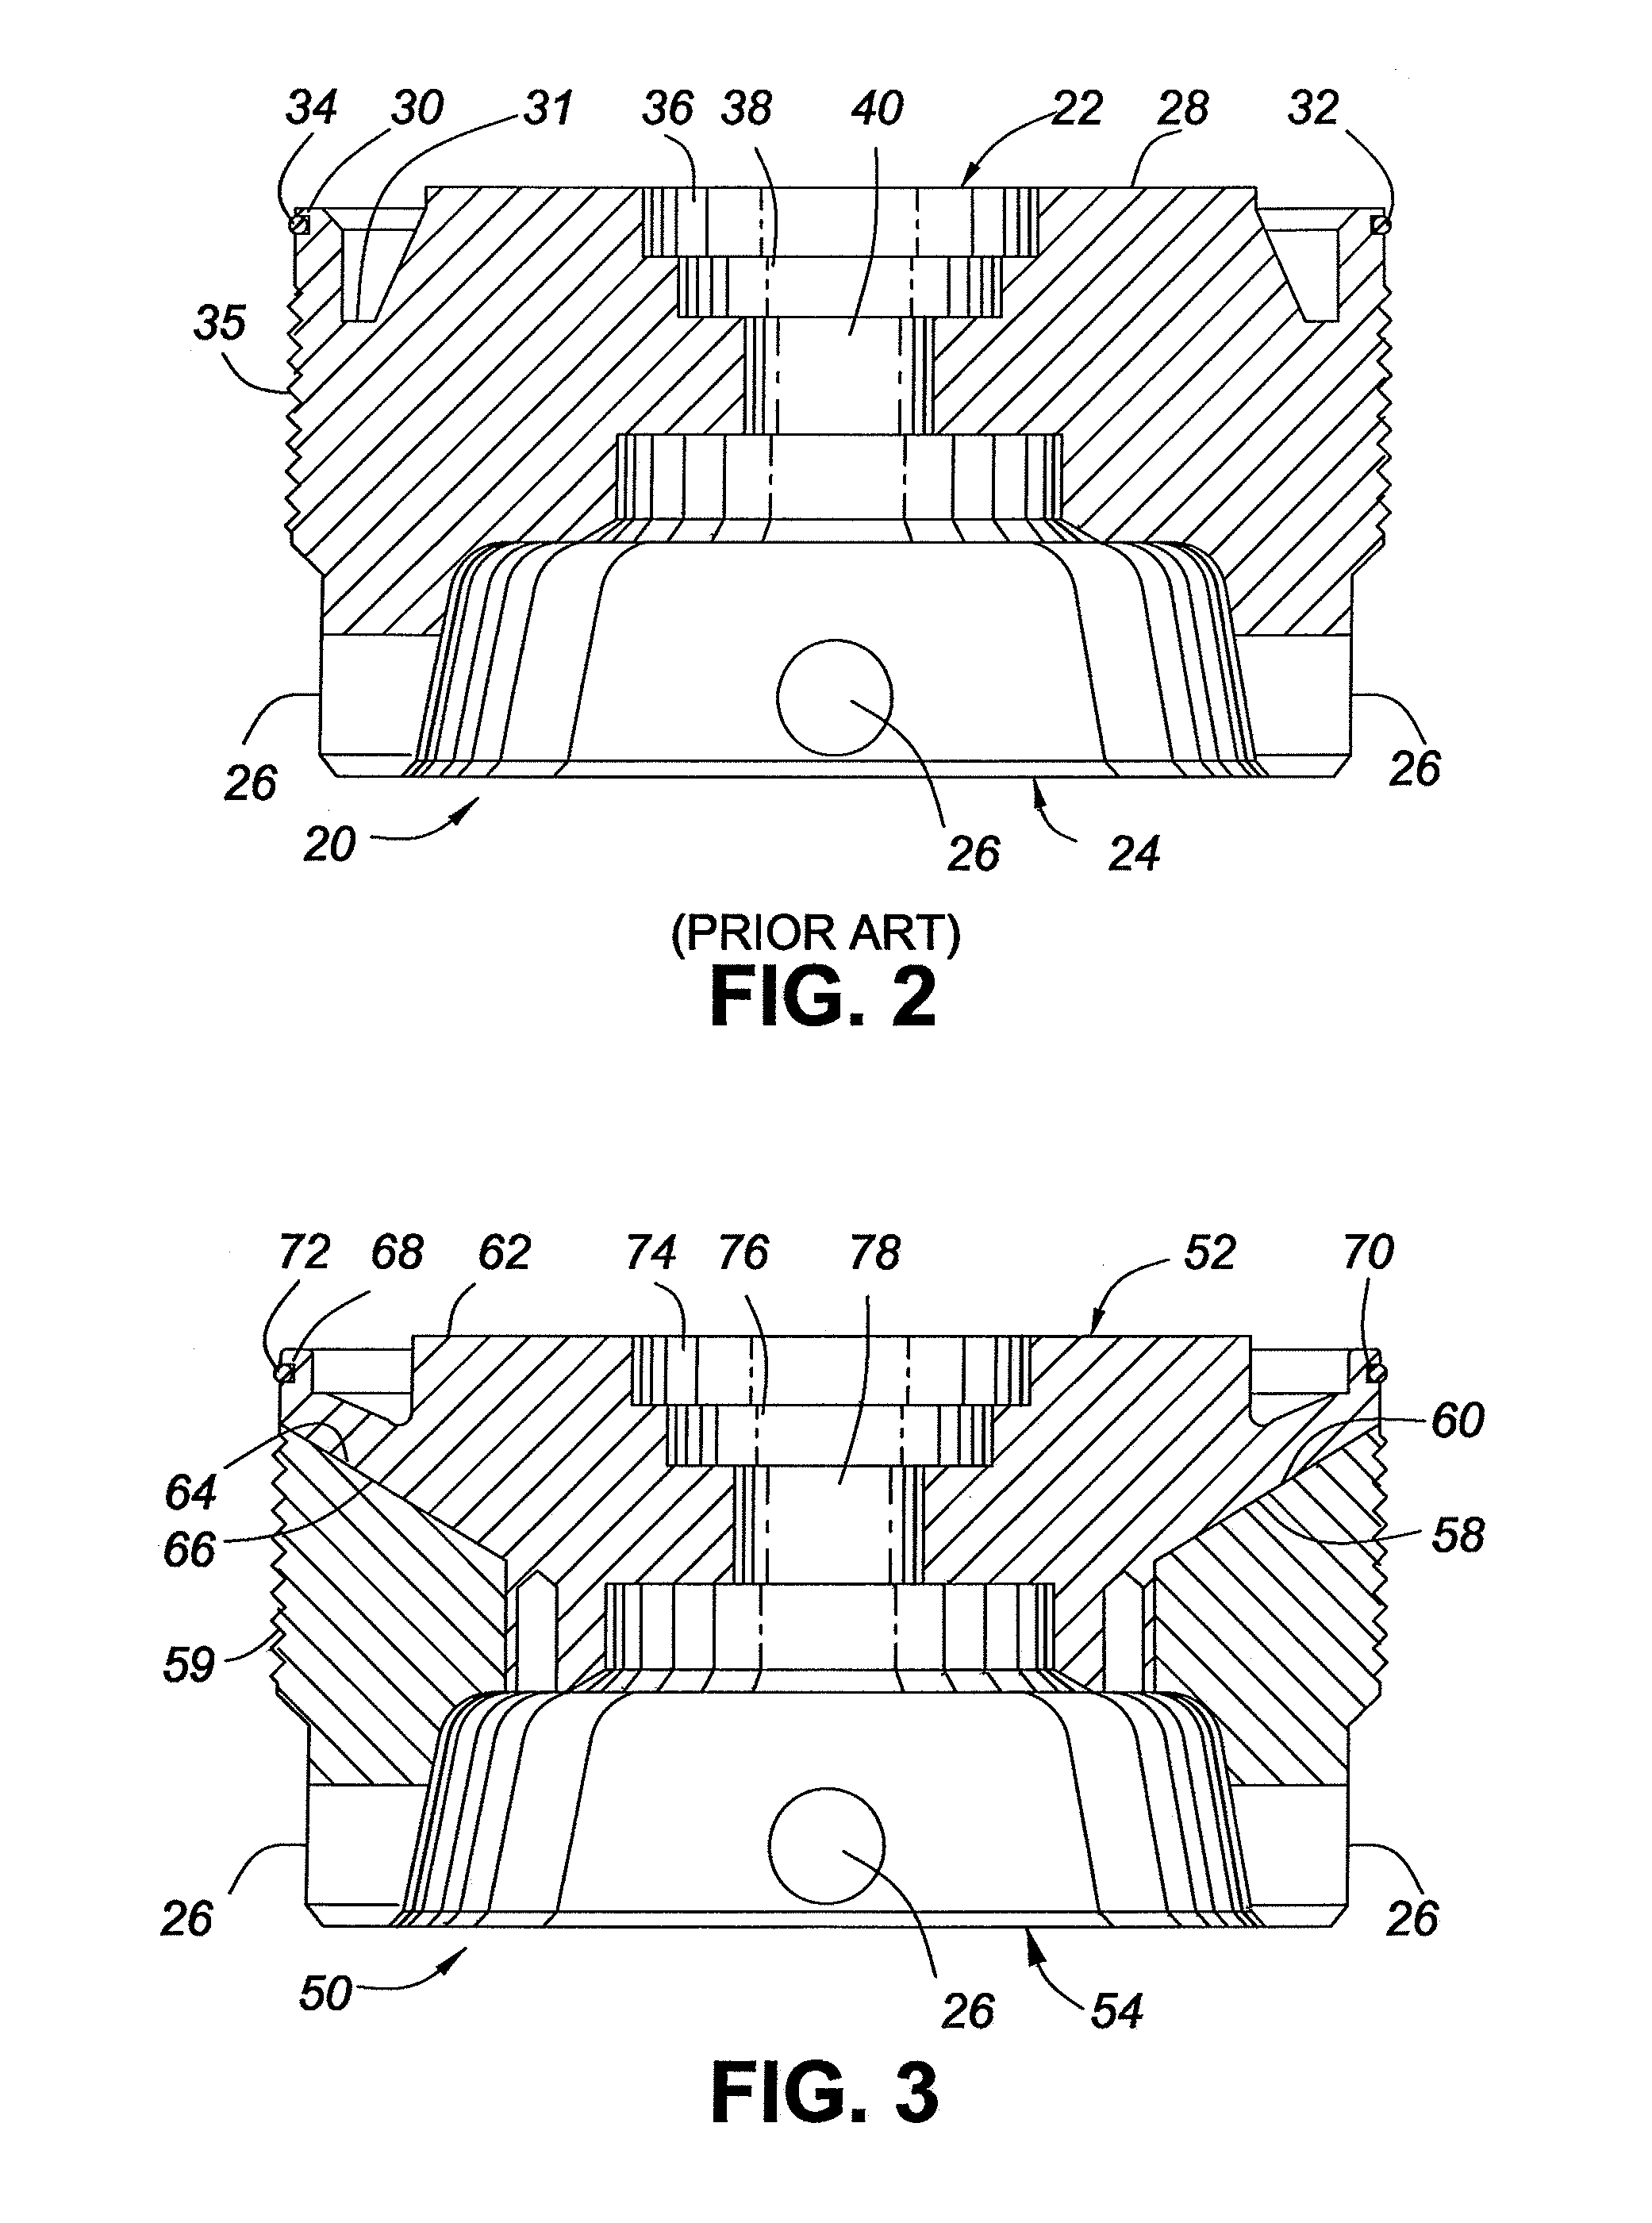 Two-part back cap for a plug valve and plug valves incorporating same